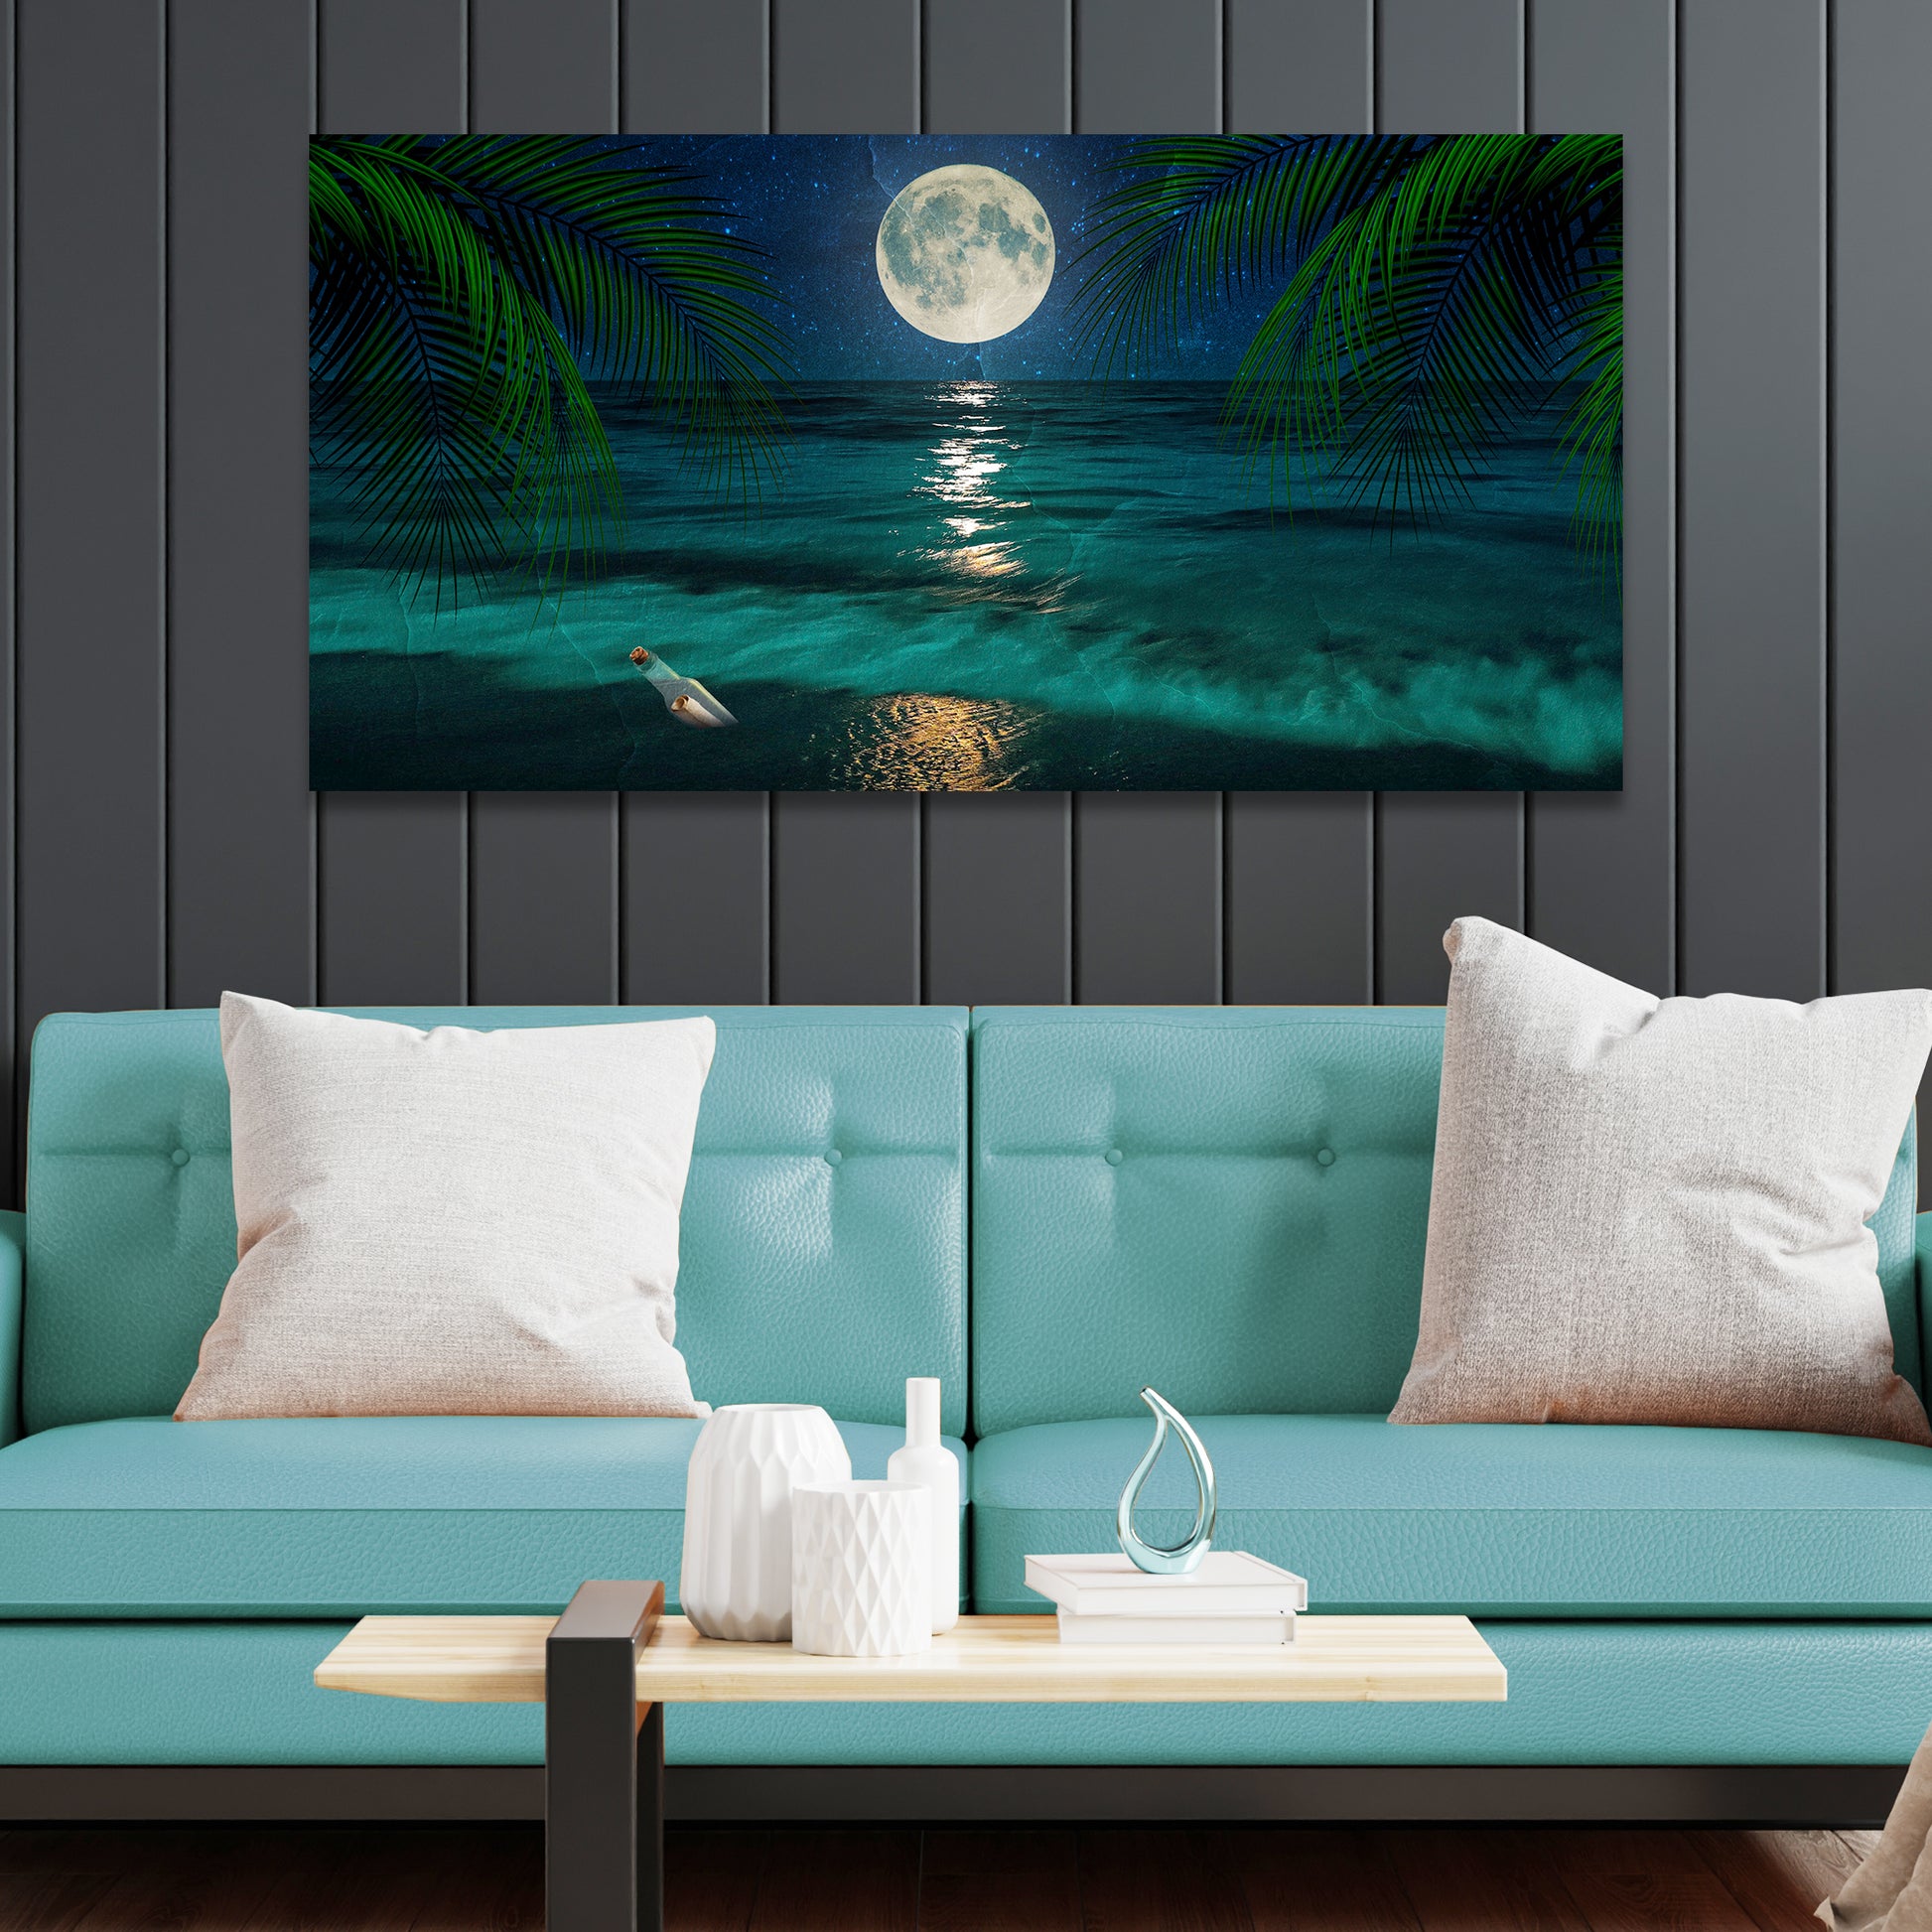 Full Moon Beach Shore Canvas Wall Art Style 2 - Image by Tailored Canvases